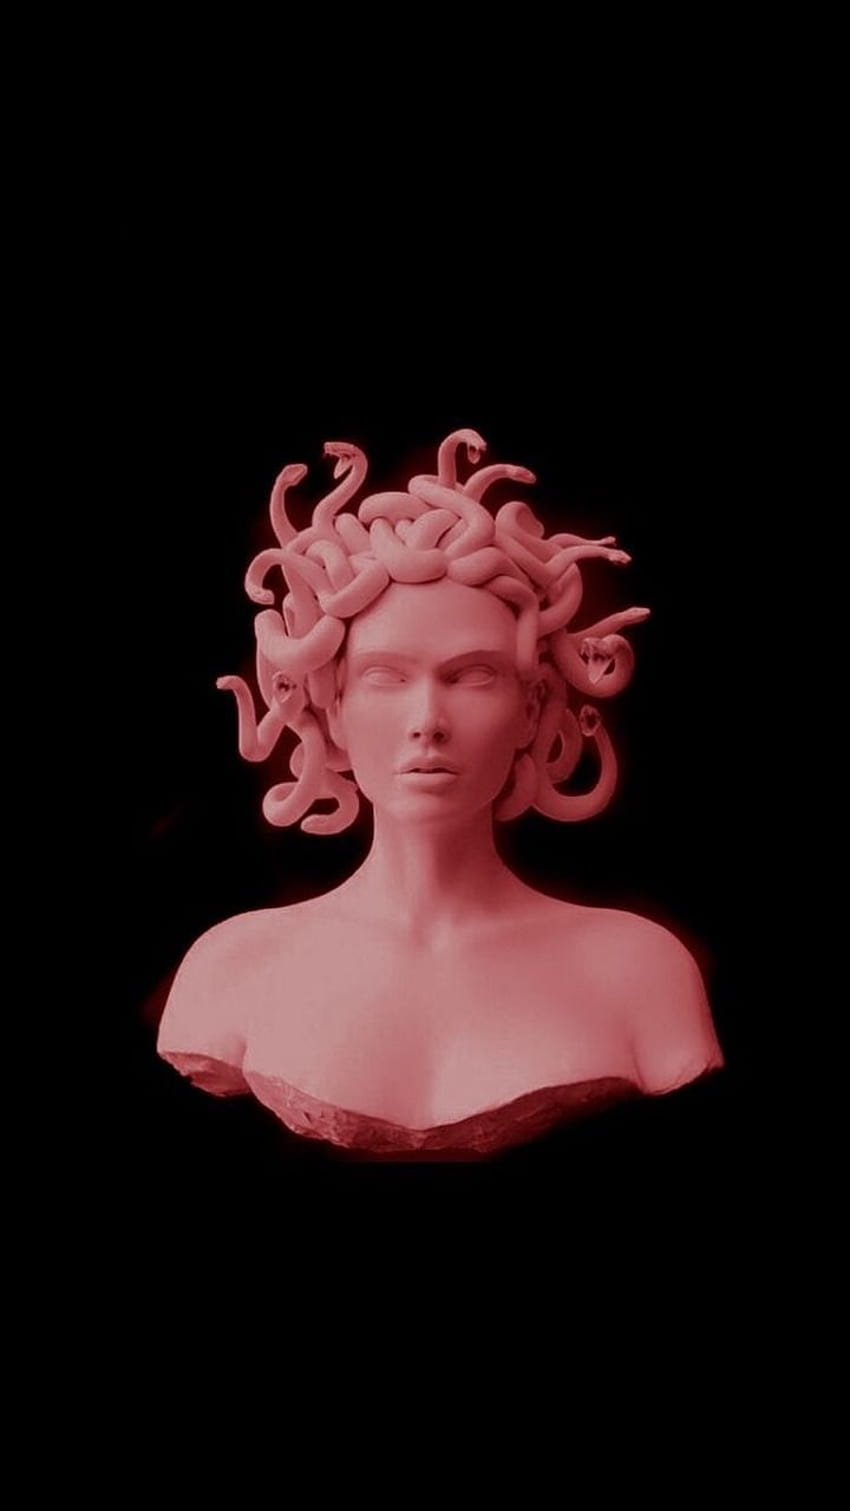 A woman with snakes on her head in red - Greek statue